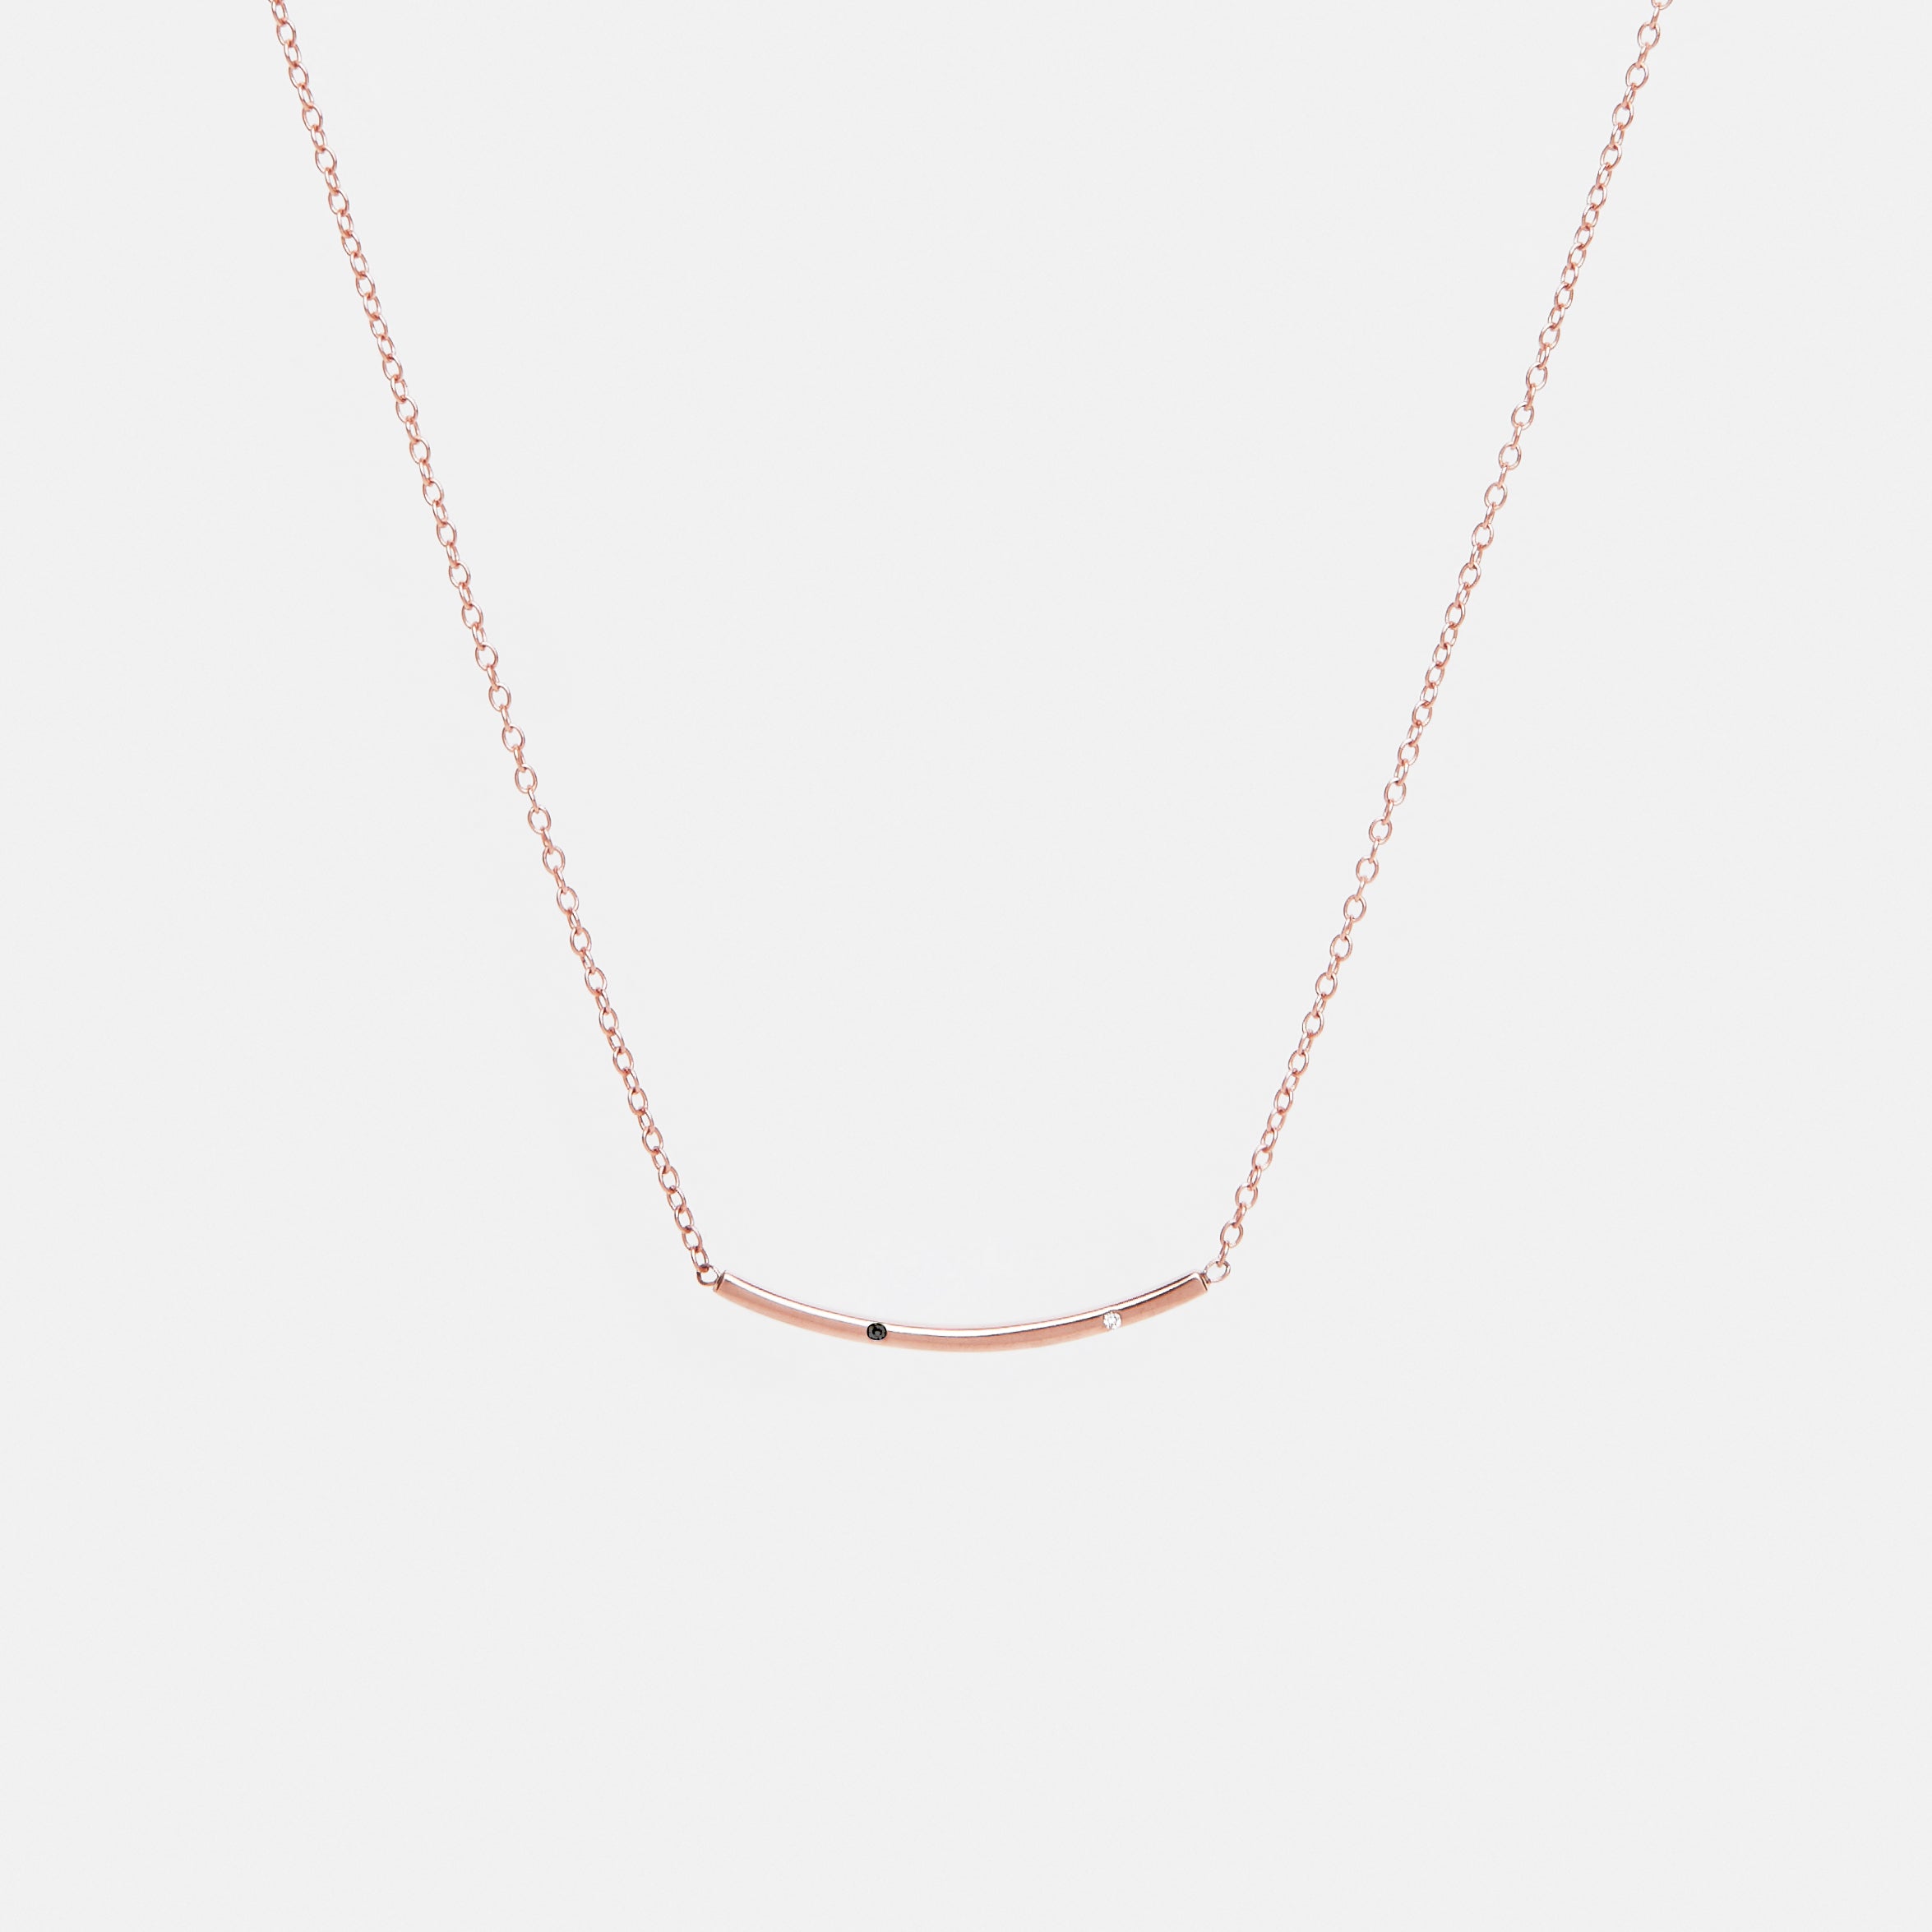 Sara Simple Necklace in 14k Rose Gold set with White and Black Diamonds By SHW Fine Jewelry NYC